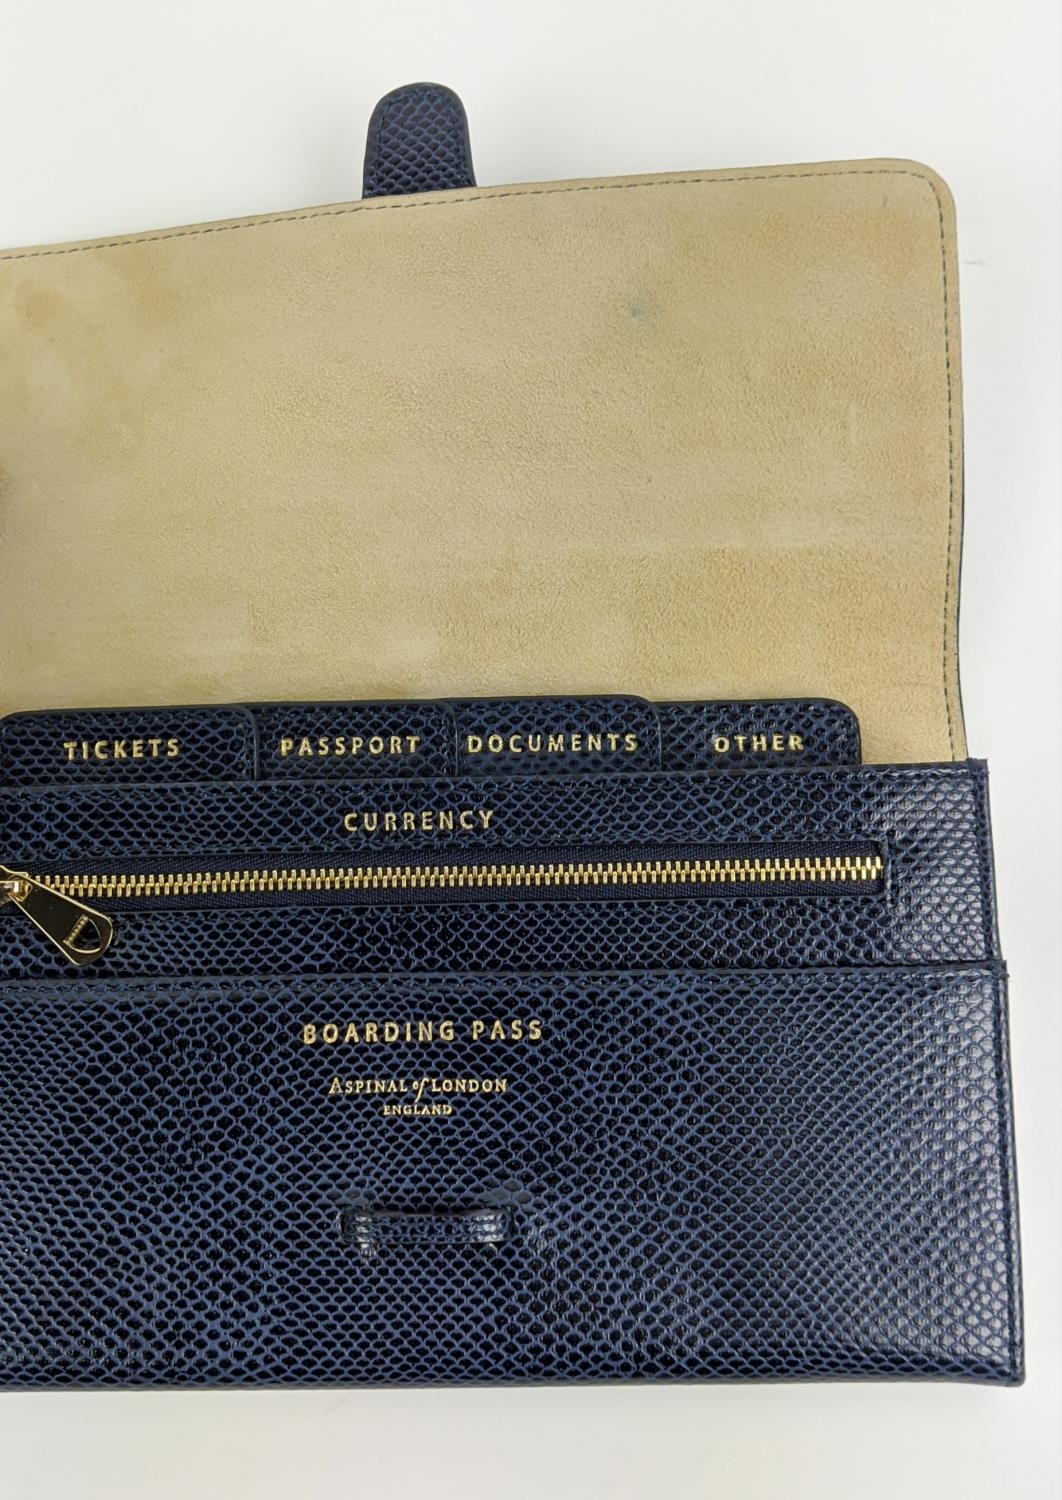 ASPINAL OF LONDON TRAVELLING WALLET, navy blue leather with contrasting suede and fabric lining, - Image 7 of 9